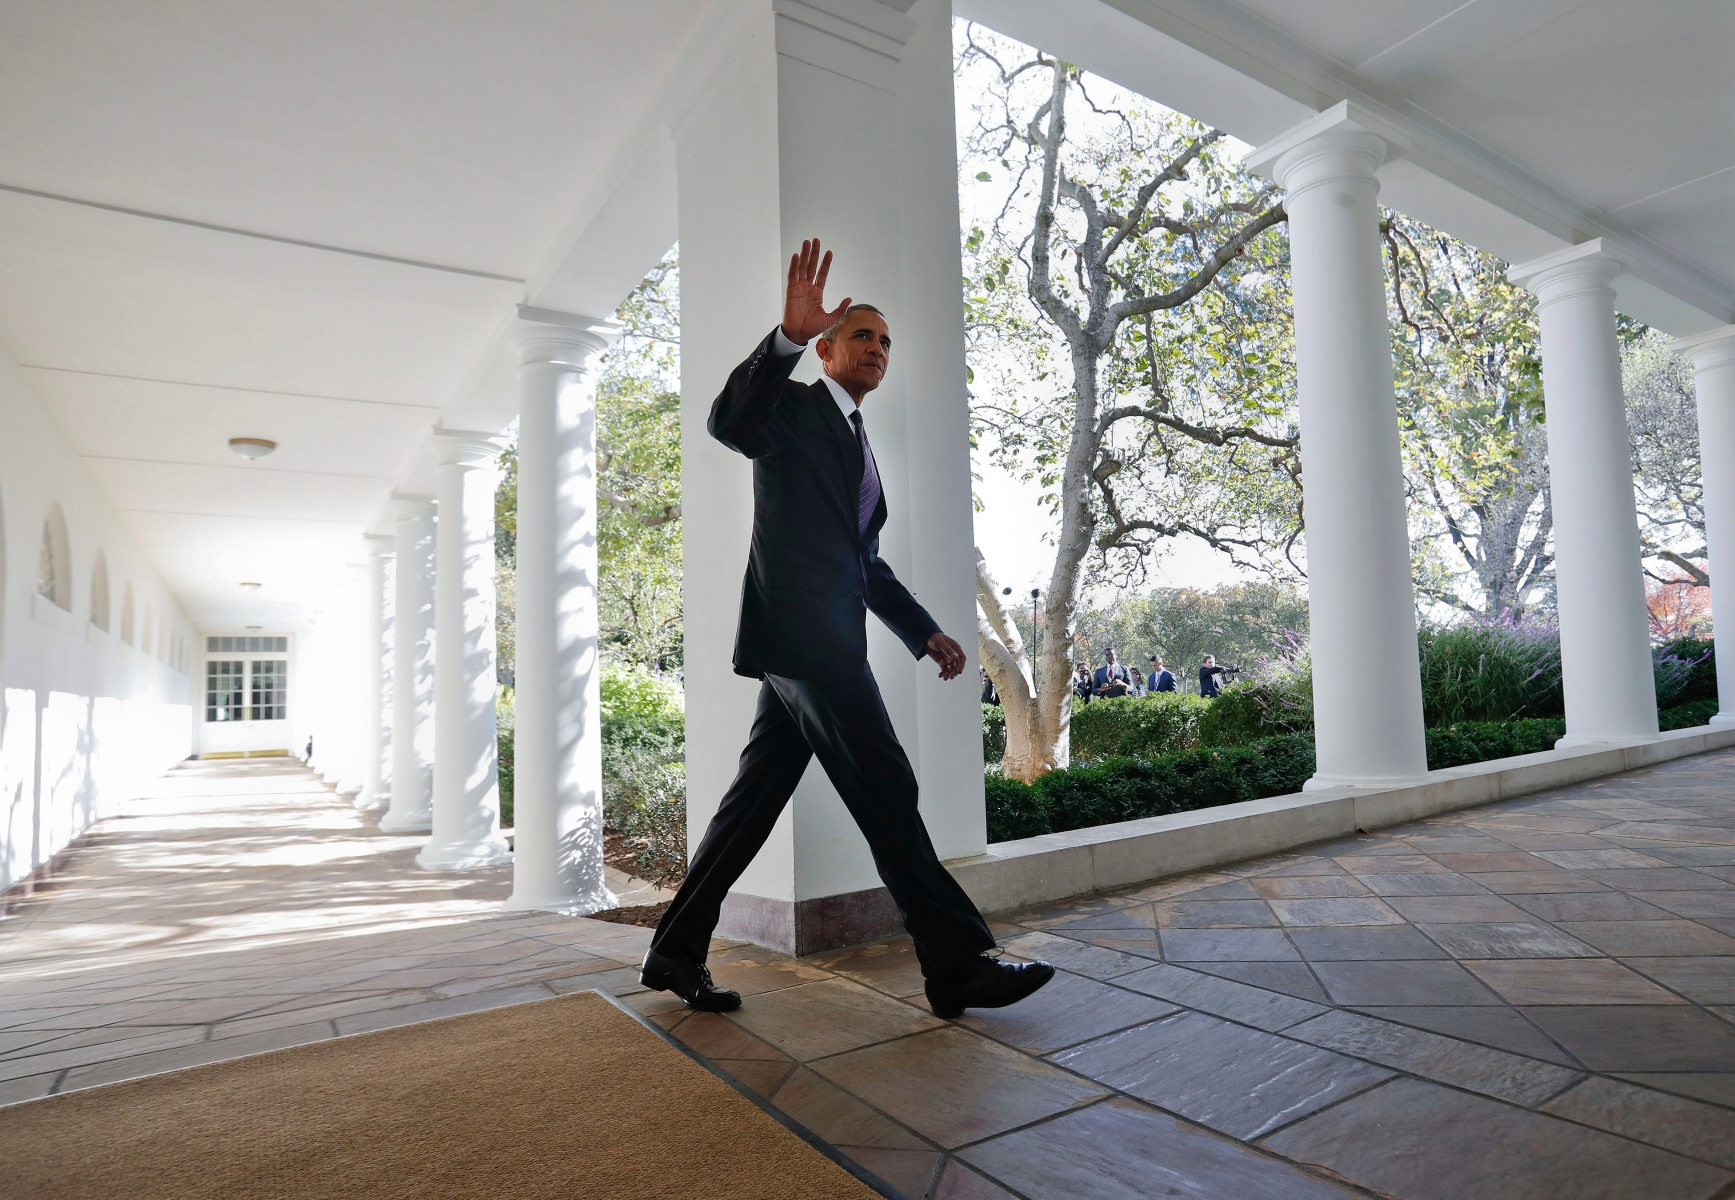 President Barack Obama waves as he walks down the White House Colonnade from the main residence to the Oval Office Tuesday, Nov. 8, 2016 in Washington. (AP Photo/Pablo Martinez Monsivais) 2016 Election Obama